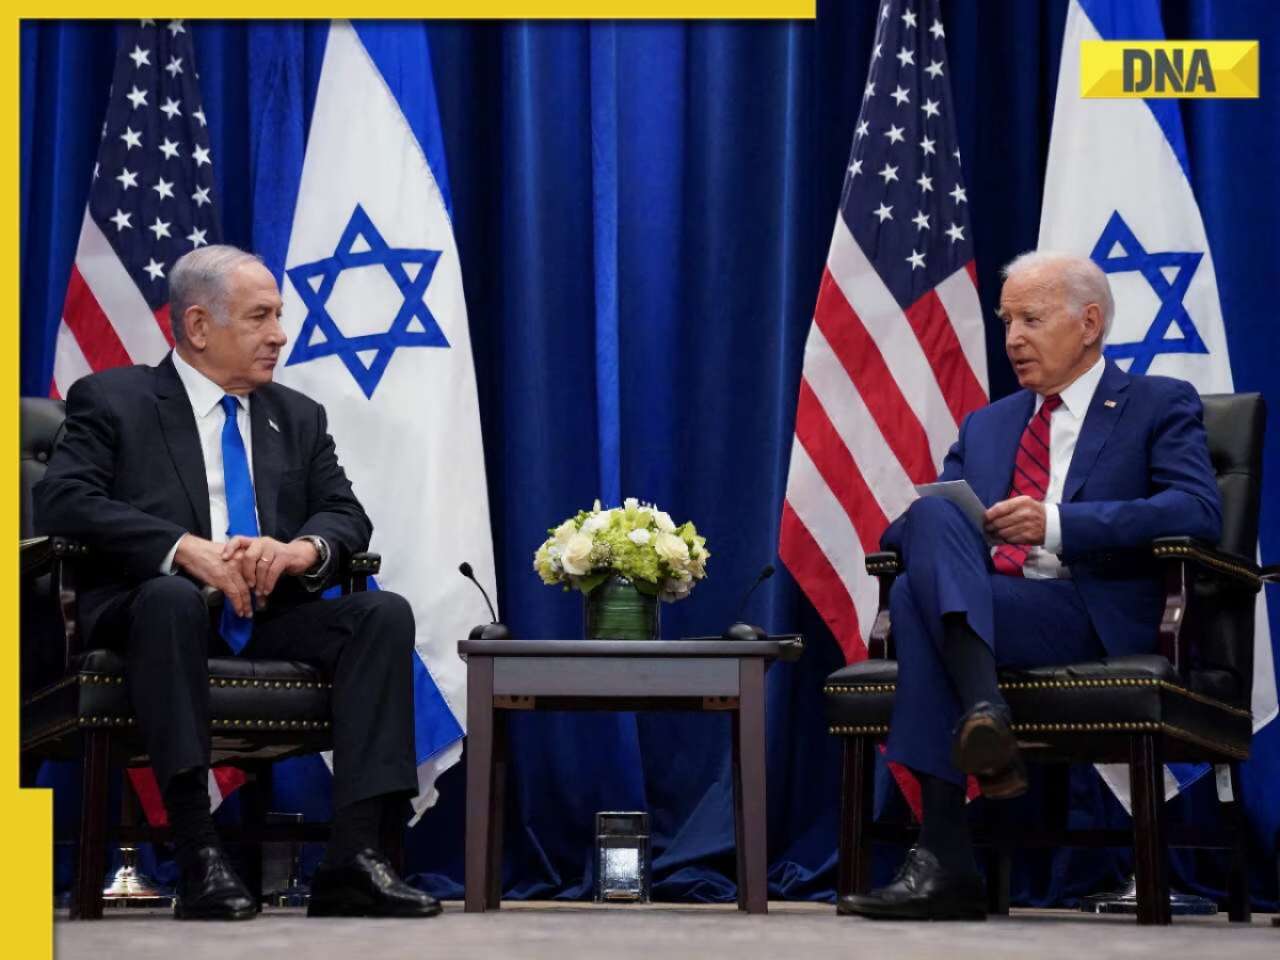 President Biden, PM Netanyahu discuss Israel's plan to open crossings for aid into Gaza